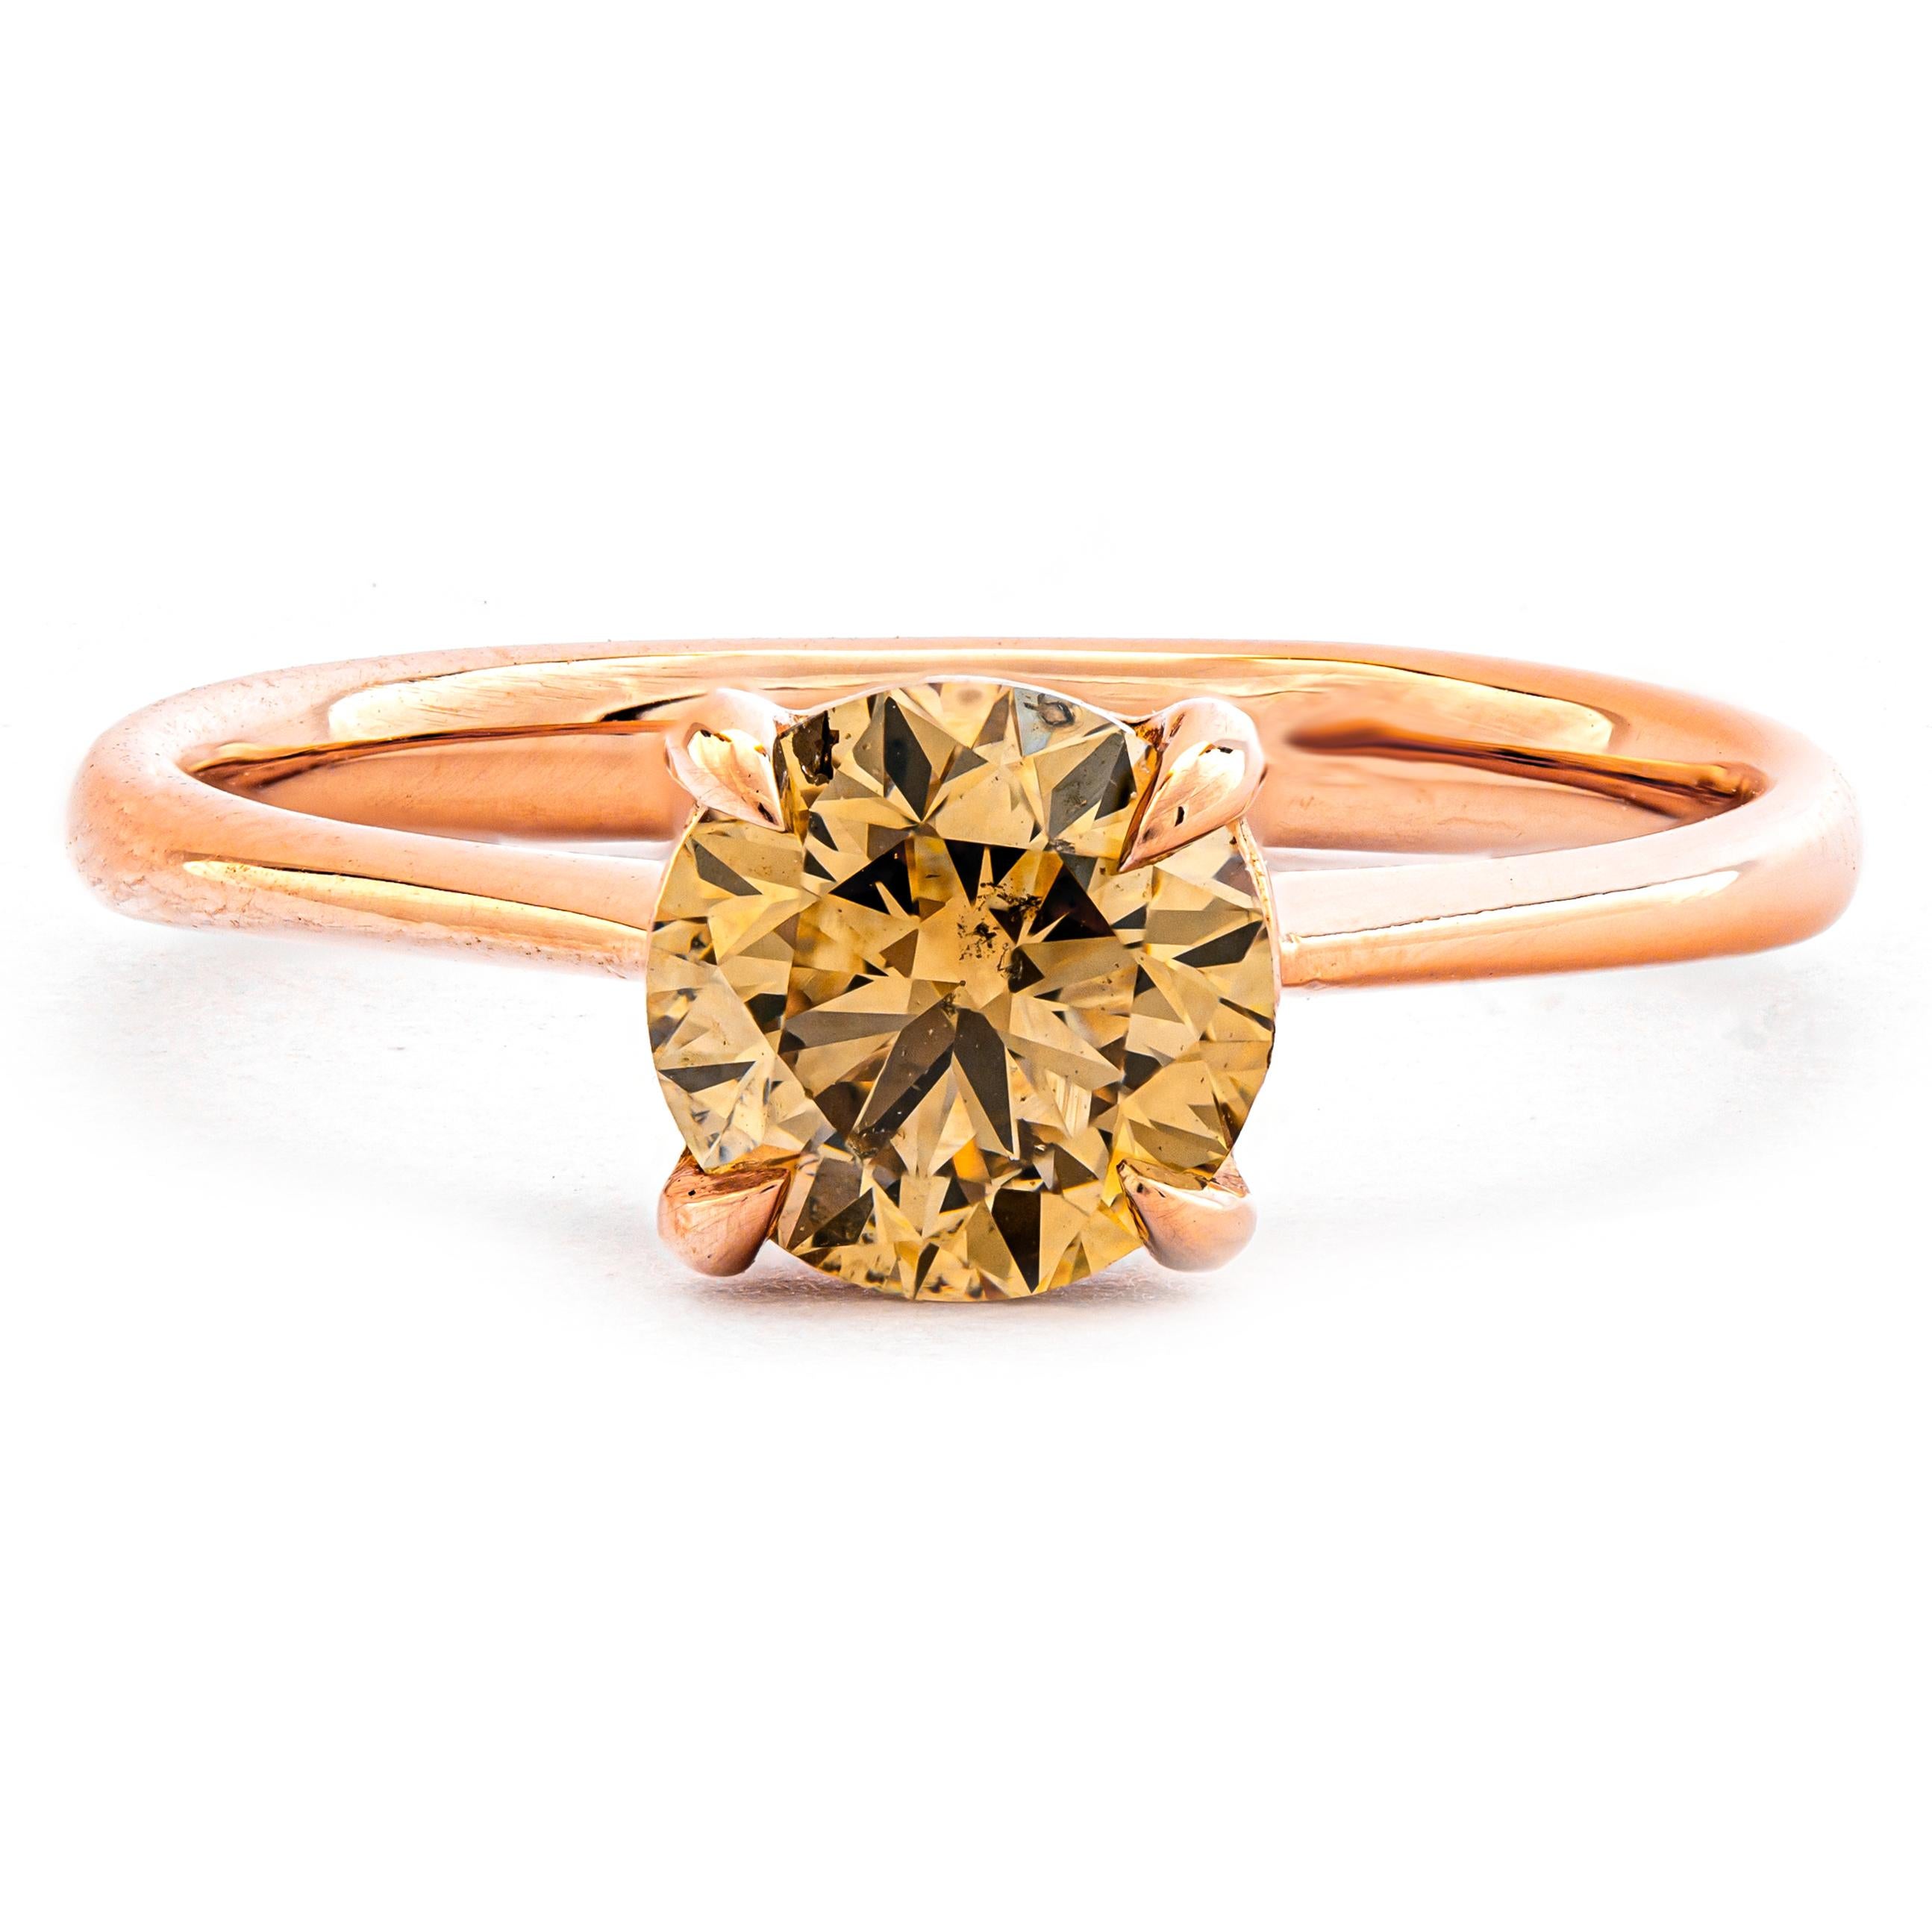 Modern 1.25 ct Natural Fancy Yellow Brown Diamond Ring, No Reserve Price